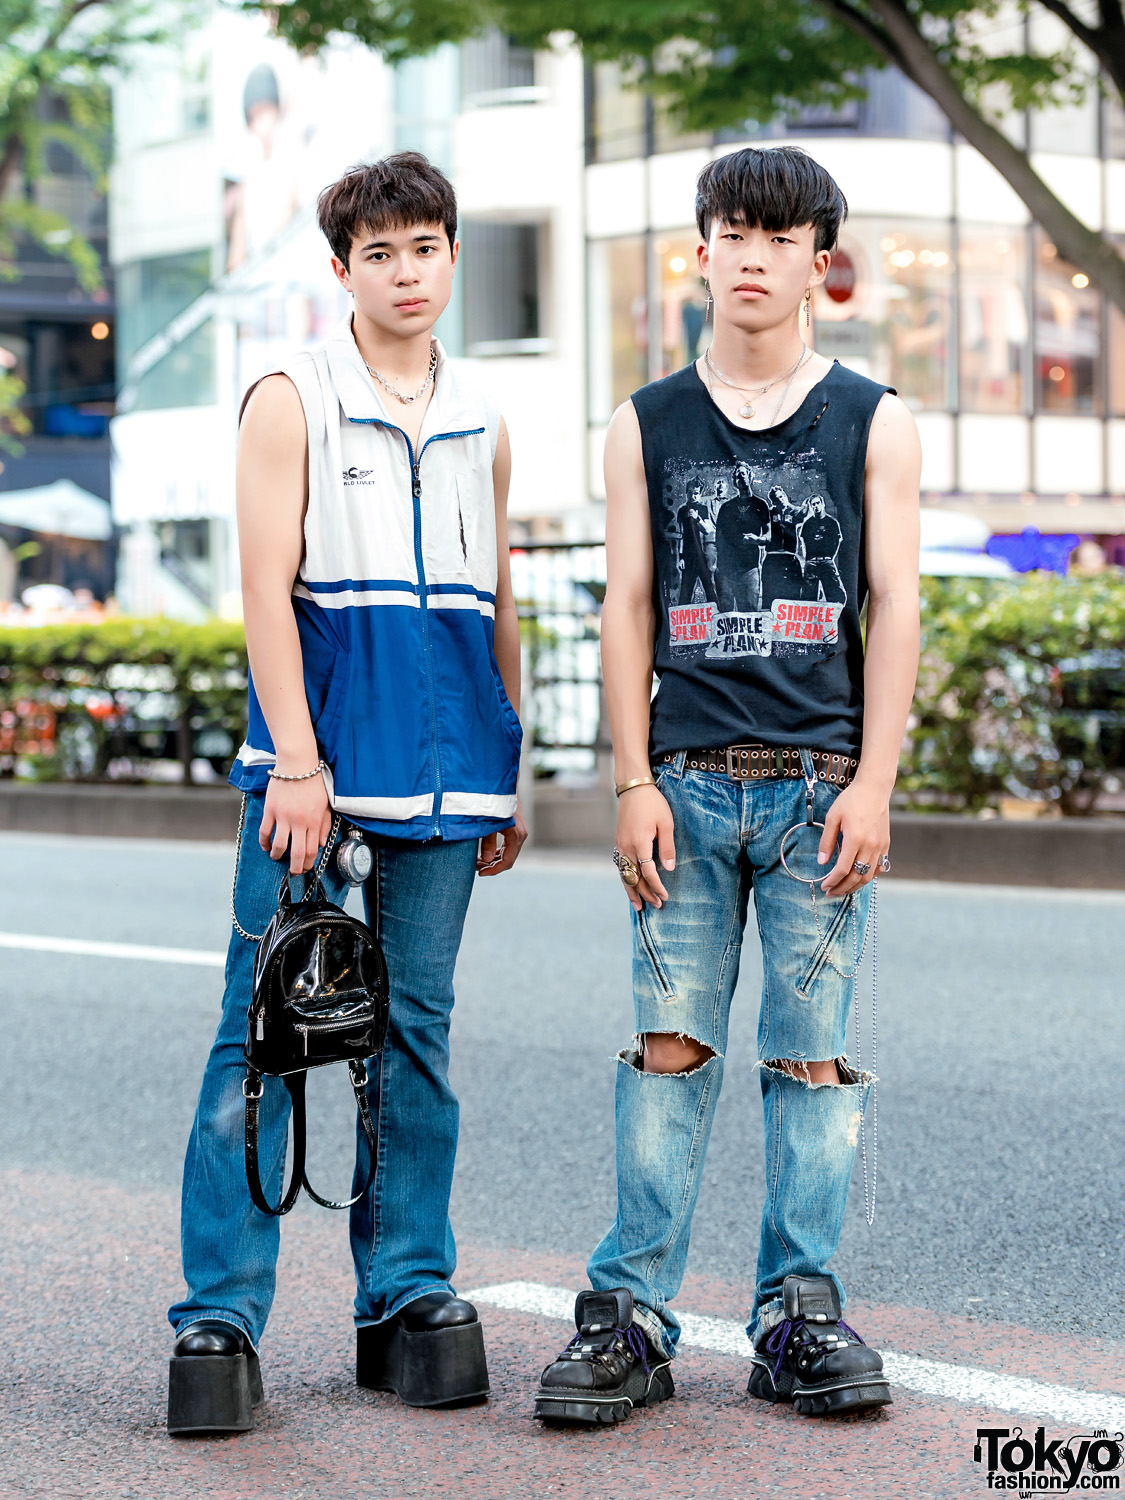 Harajuku Casual Mens' Street Styles w/ Simple Plan Top, Funtasma Tall Boots, Forever 21 Mini-Backpack, Vivienne Westwood Flask Keychain & New Rock Sneakers